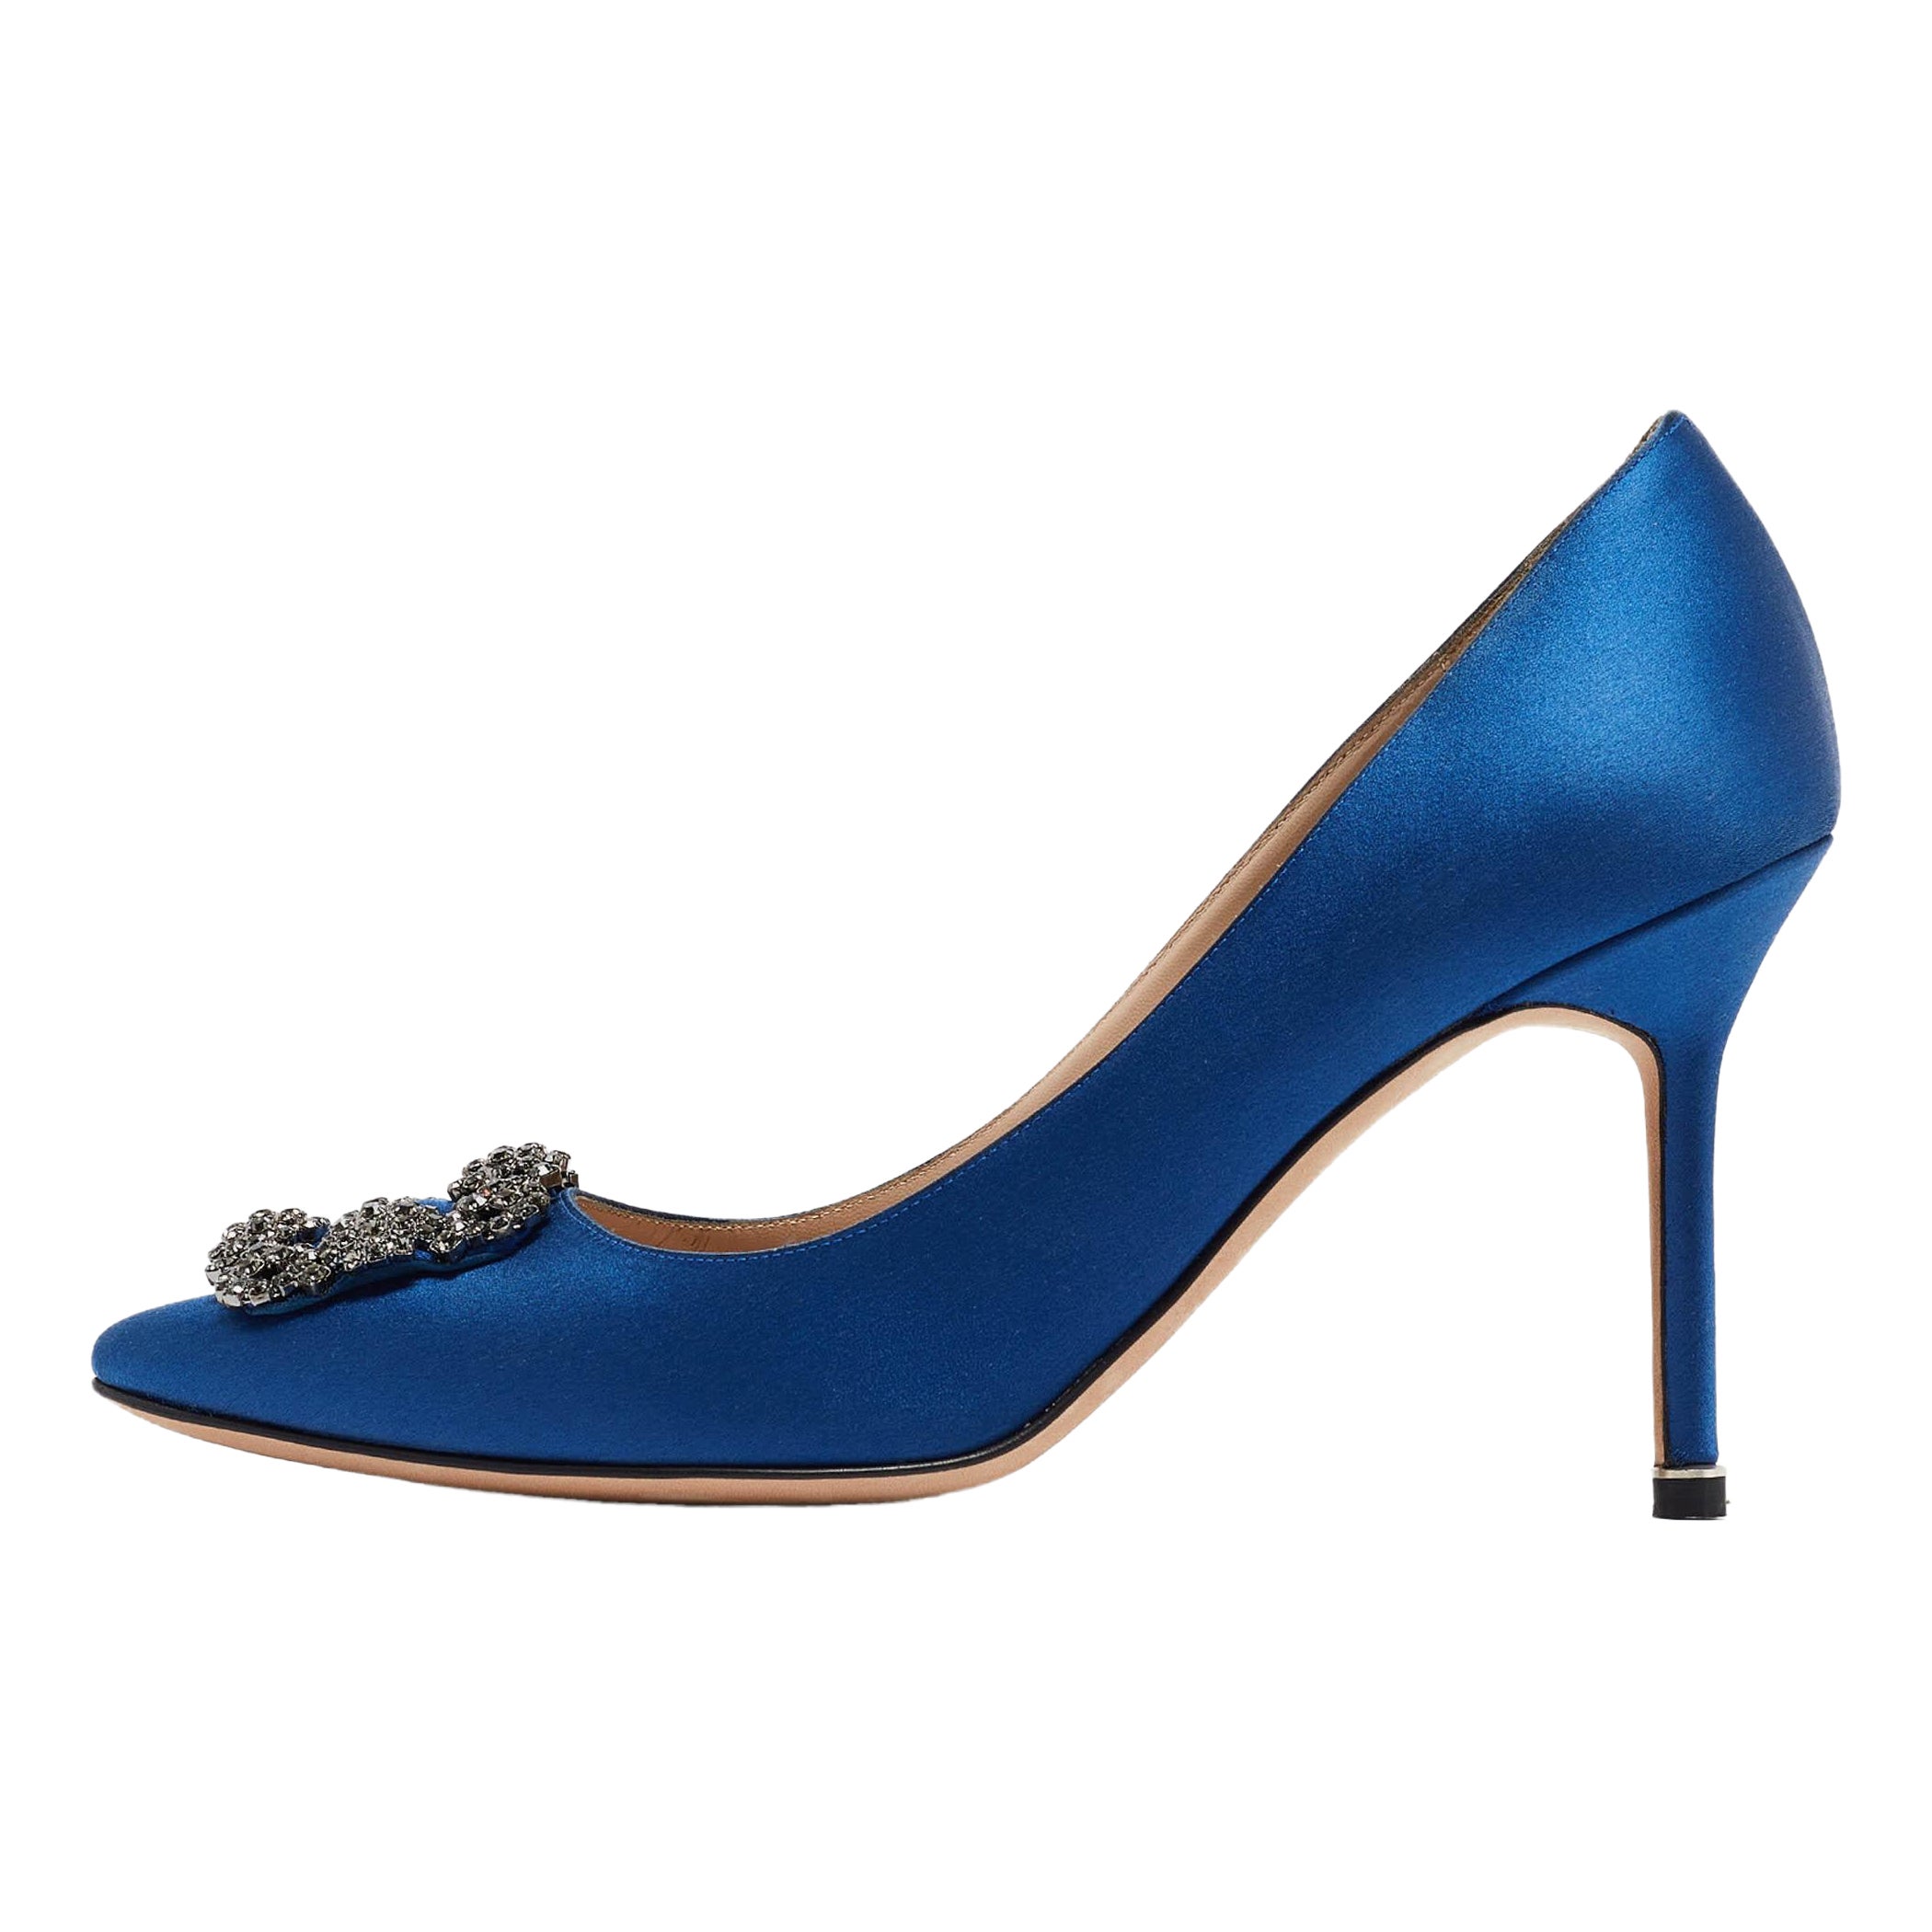 Who owns Manolo Blahnik shoes?